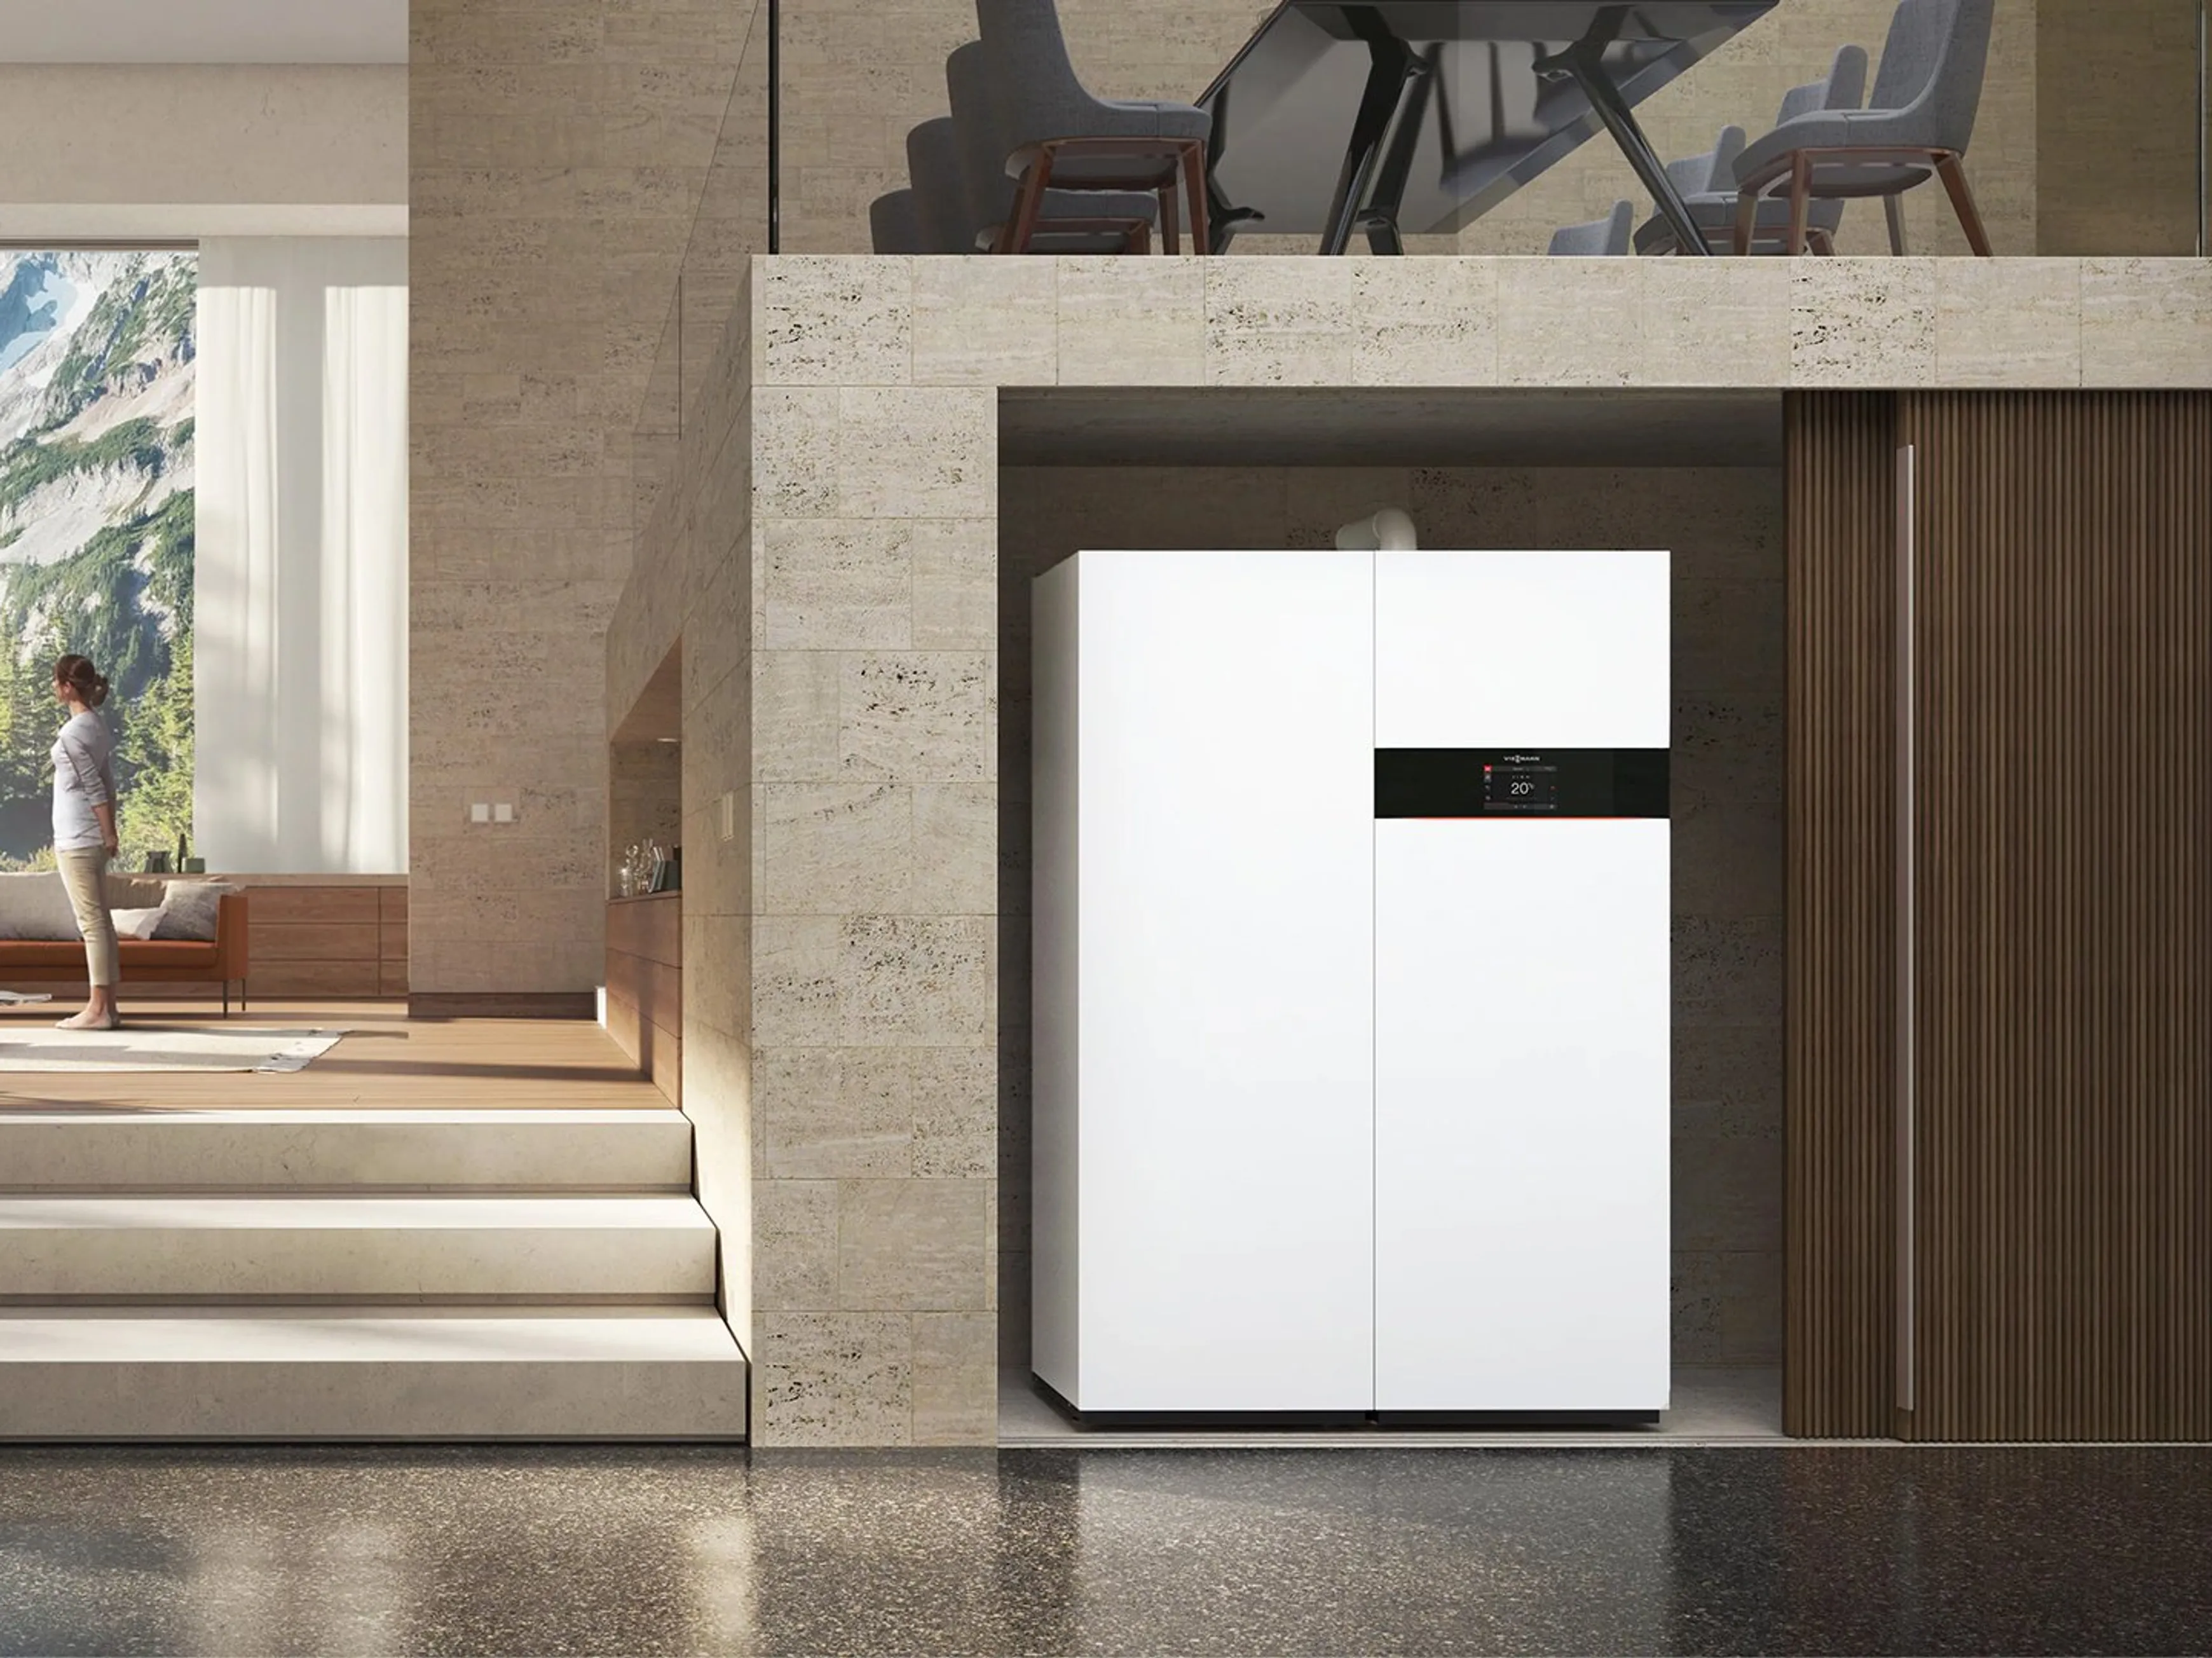 Viessmann Vitodens standing in a niche of a living room